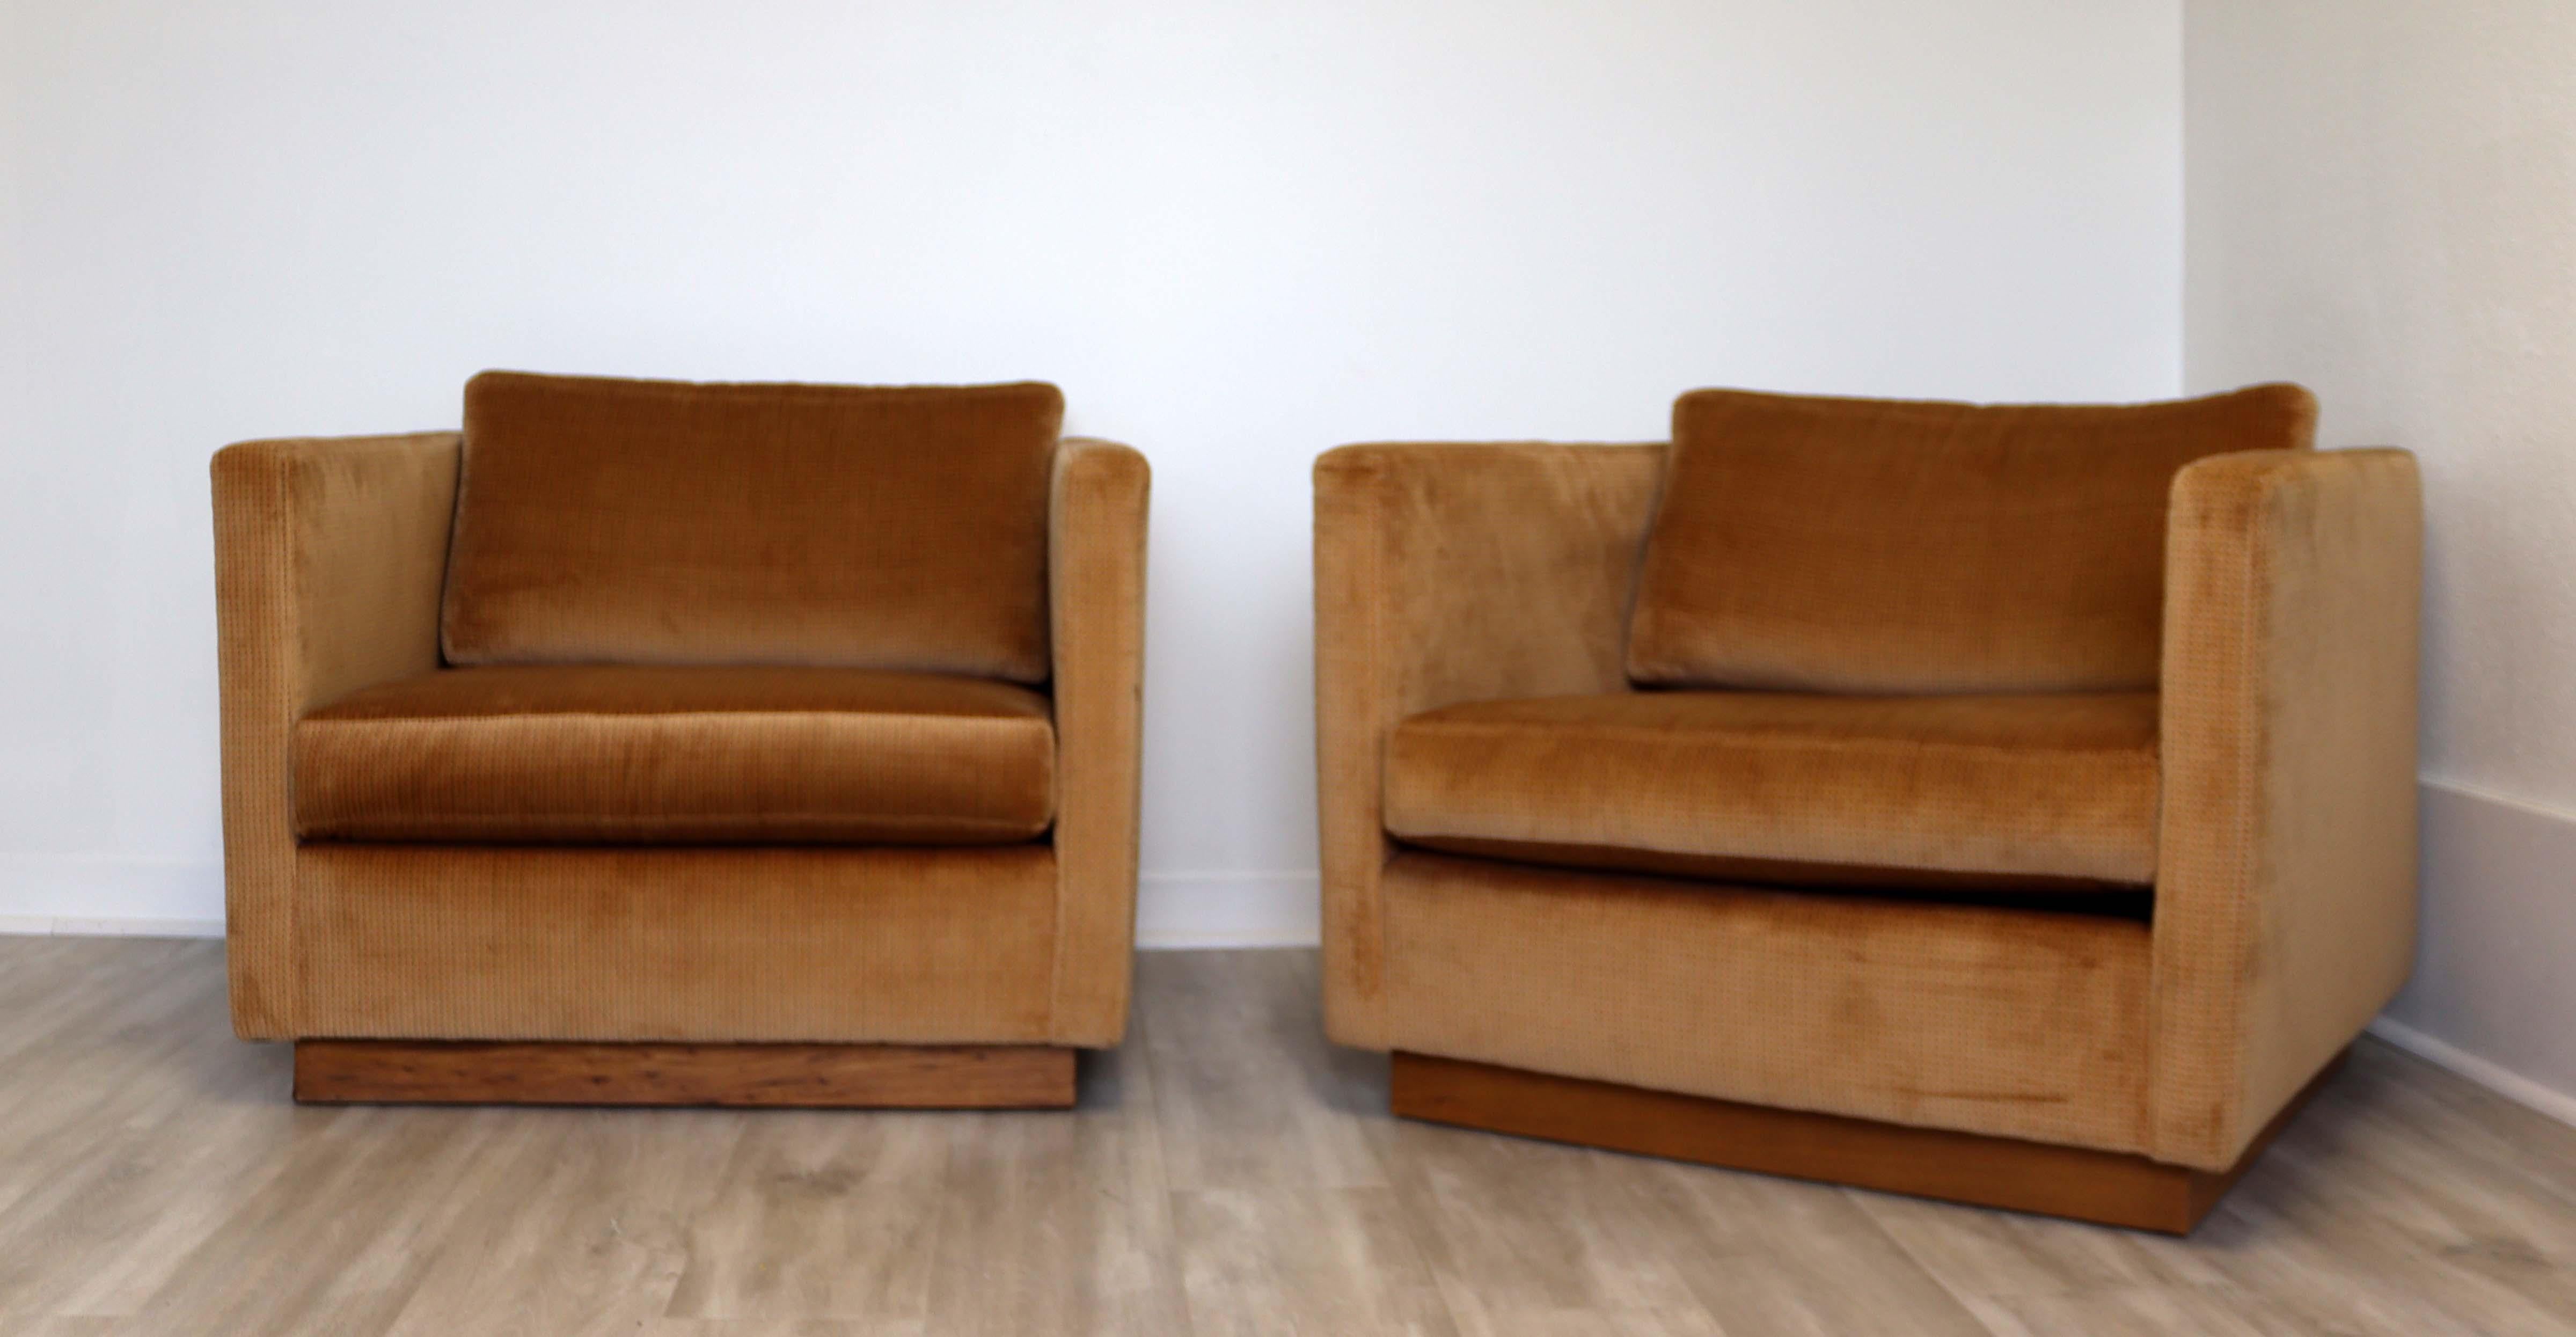 Pair of Baughman for Thayer Coggin Cube Lounge Chairs Mid-Century Modern 1